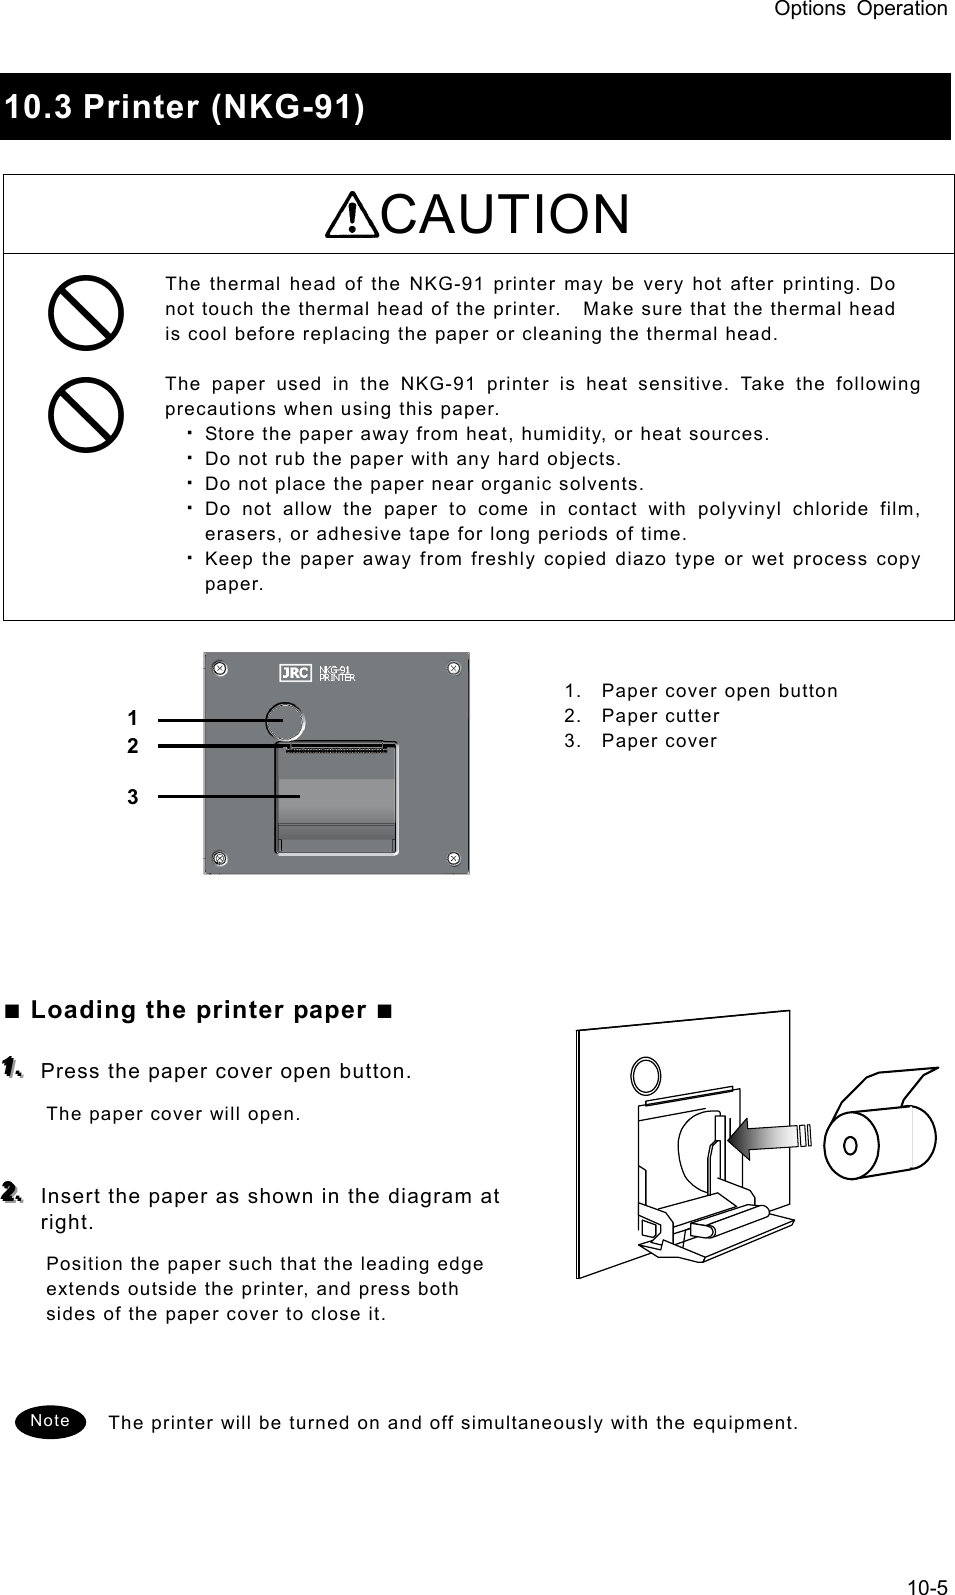 Options Operation 10-5  10.3 Printer (NKG-91)  CAUTION The thermal head of the NKG-91 printer may be very hot after printing. Do not touch the thermal head of the printer.    Make sure that the thermal head is cool before replacing the paper or cleaning the thermal head.    The paper used in the NKG-91 printer is heat sensitive. Take the following precautions when using this paper.   ・ Store the paper away from heat, humidity, or heat sources.   ・ Do not rub the paper with any hard objects.   ・ Do not place the paper near organic solvents.   ・ Do not allow the paper to come in contact with polyvinyl chloride film, erasers, or adhesive tape for long periods of time.   ・ Keep the paper away from freshly copied diazo type or wet process copy paper.               ■ Loading the printer paper ■  111...   Press the paper cover open button.   The paper cover will open.    222...   Insert the paper as shown in the diagram at right.  Position the paper such that the leading edge extends outside the printer, and press both sides of the paper cover to close it.     The printer will be turned on and off simultaneously with the equipment.     1 2 3 1.  Paper cover open button 2. Paper cutter 3. Paper cover Note 